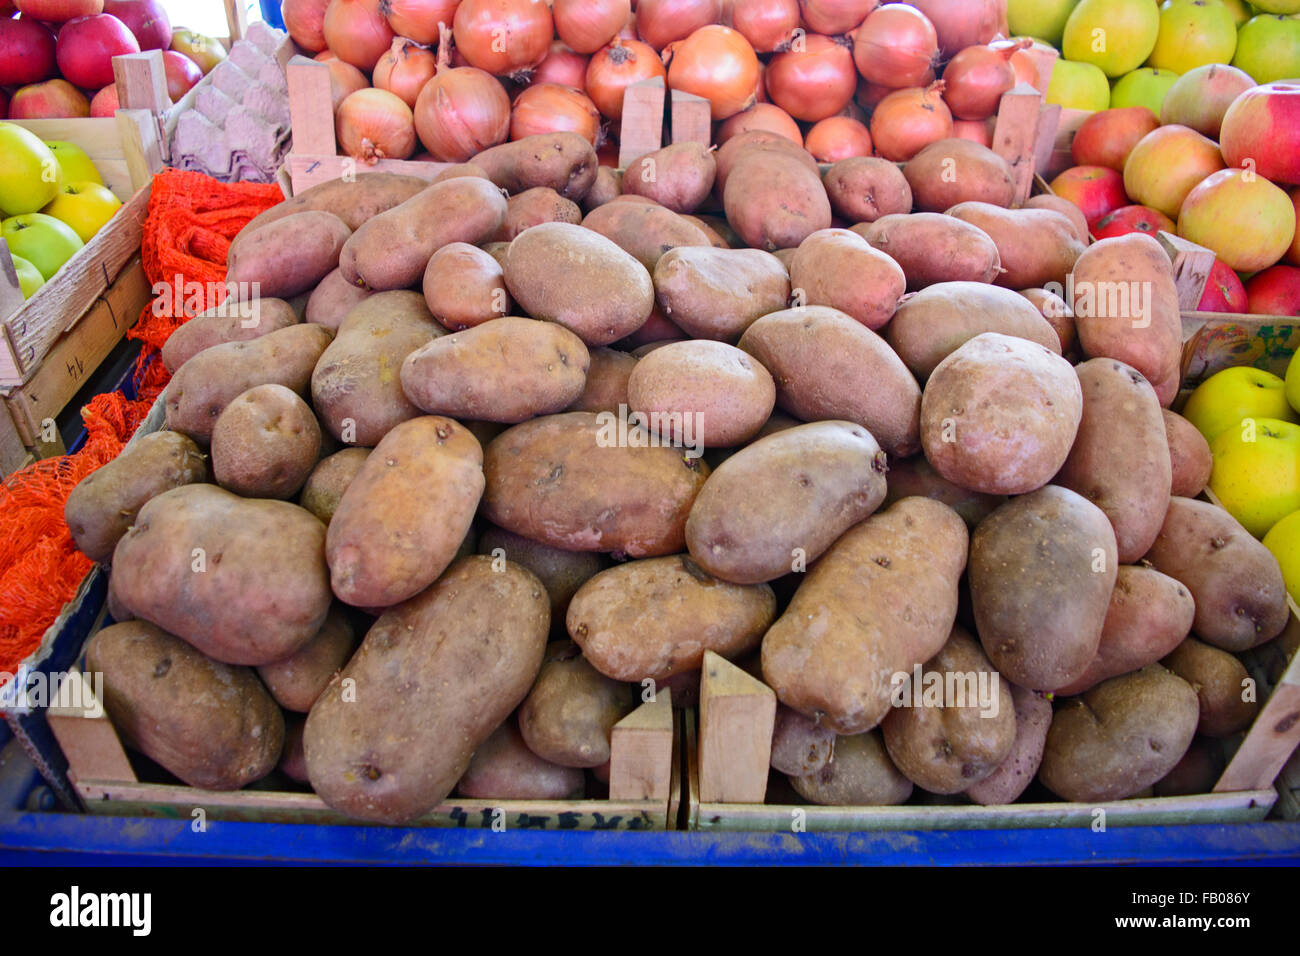 Fresh potatoes on a market stall in an apple box waiting on customers. Stock Photo